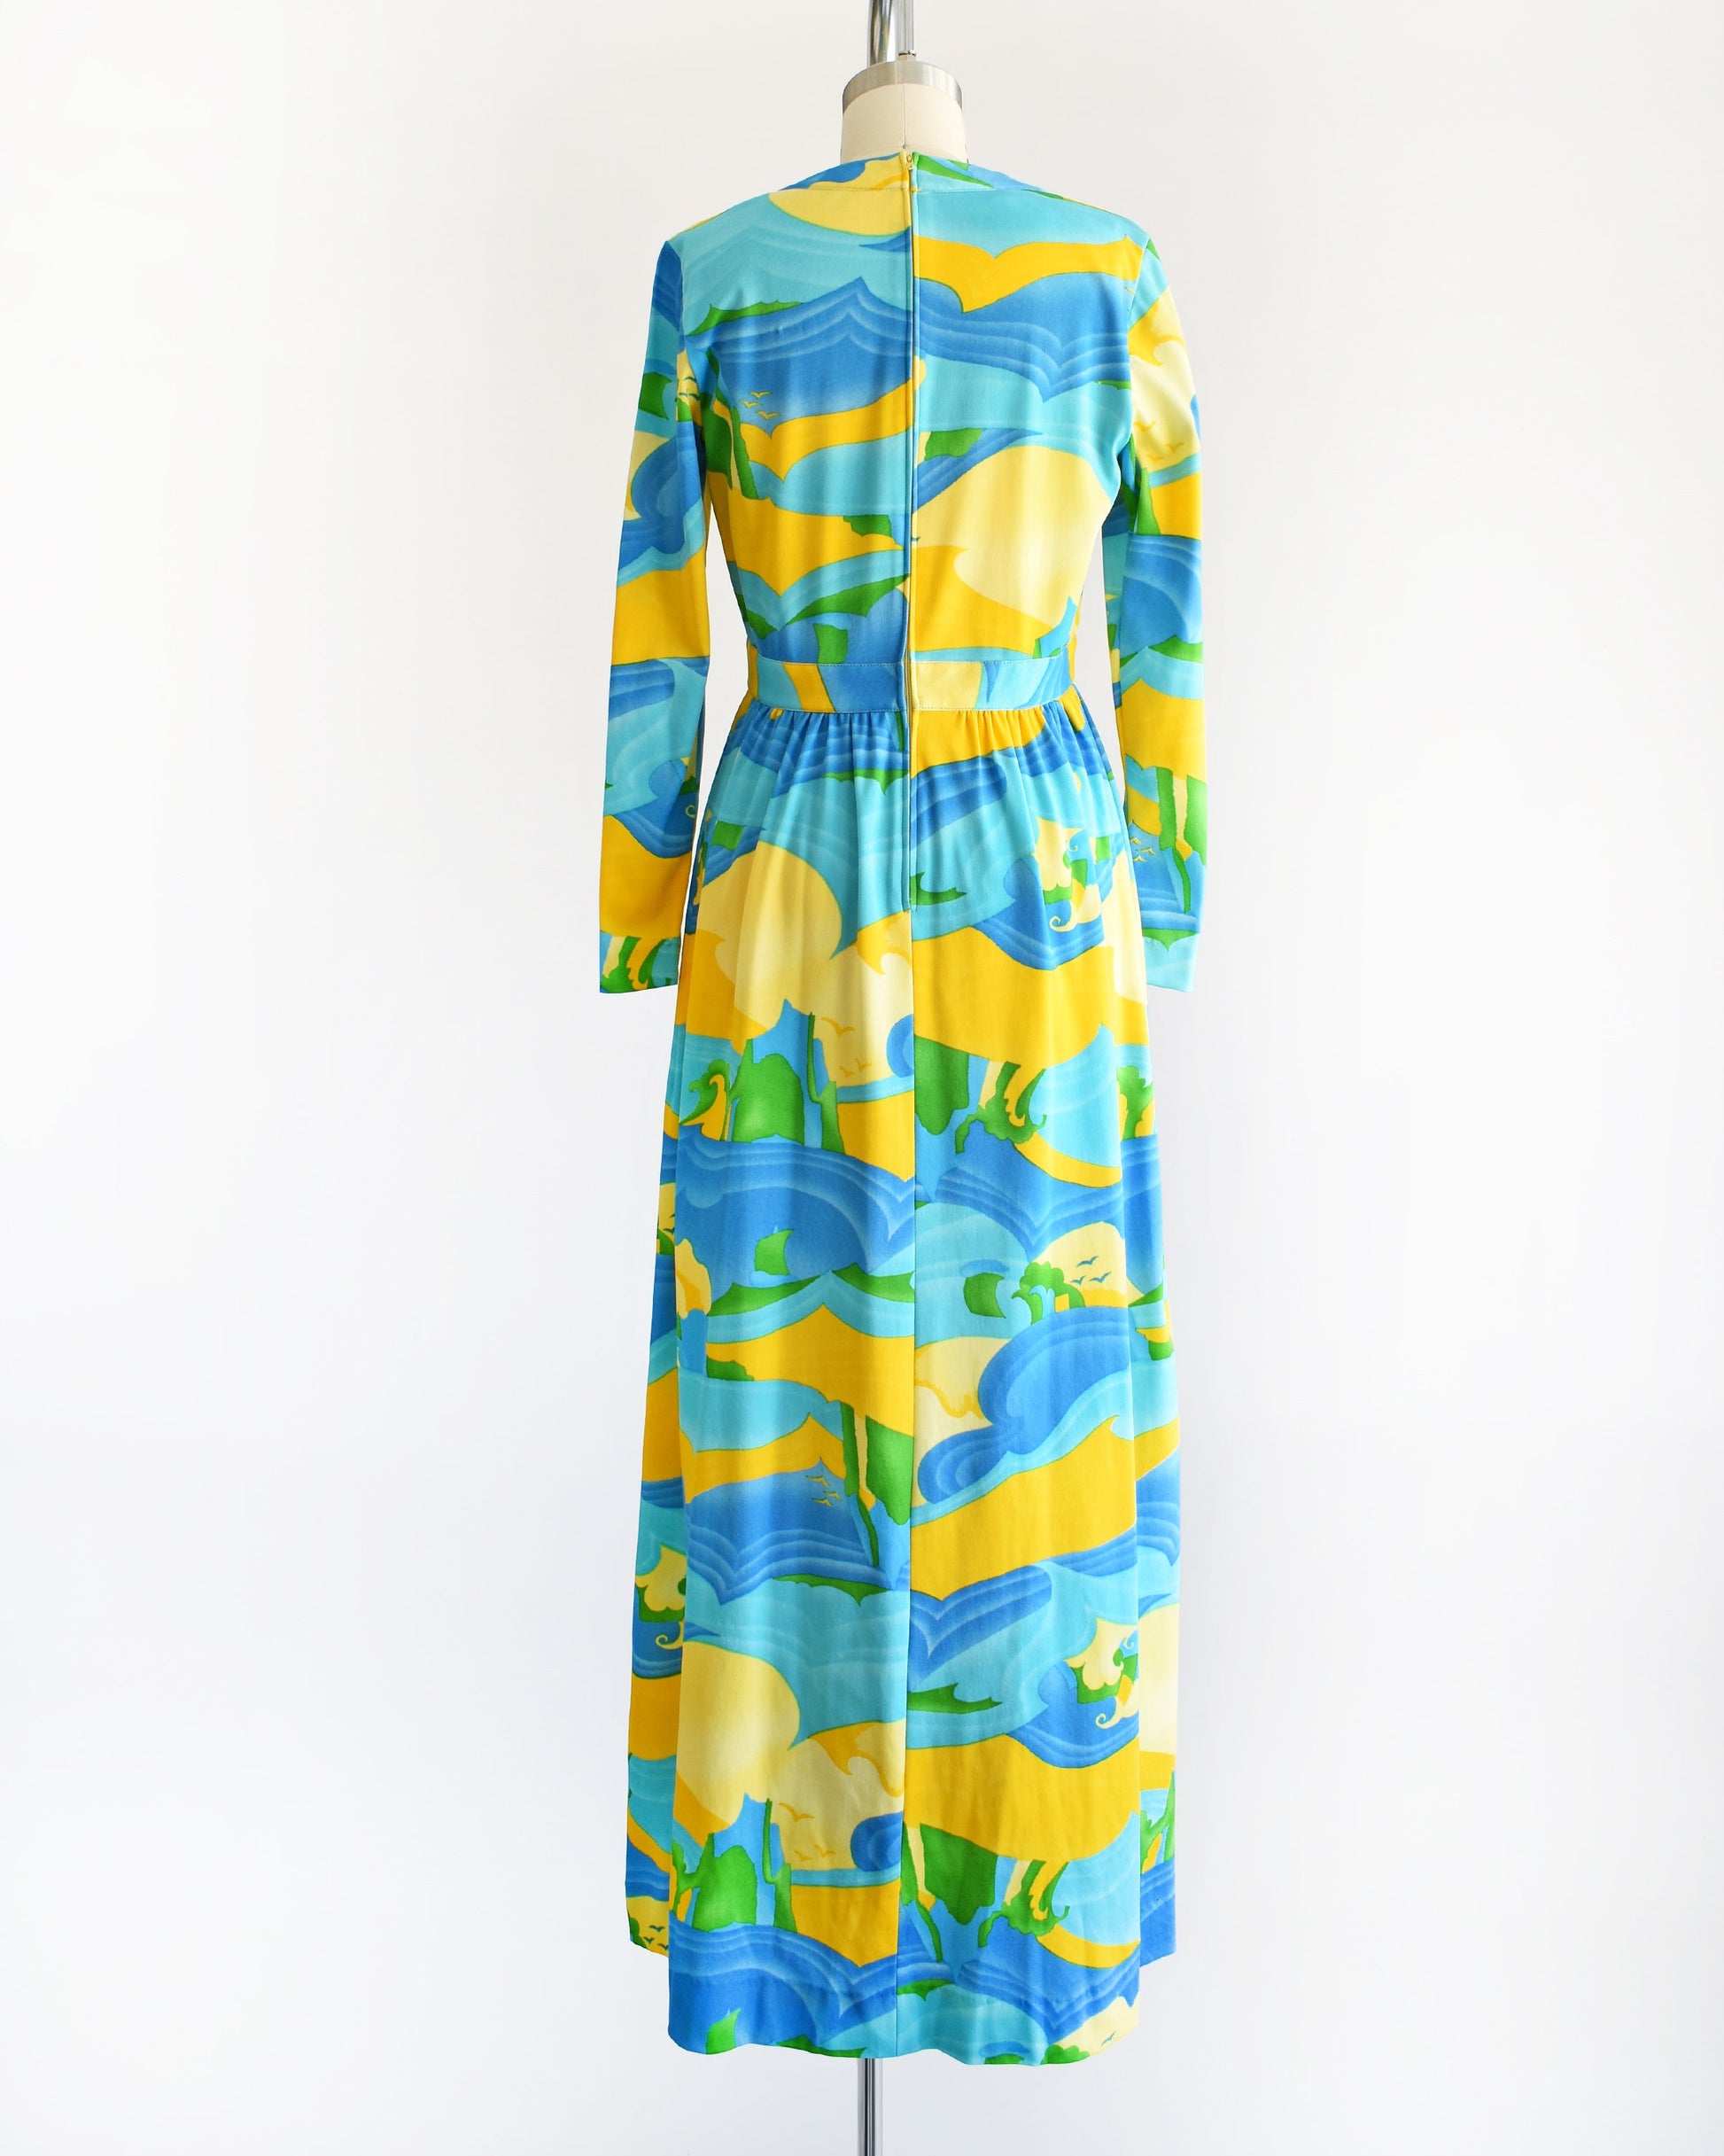 Back view of a vintage 70s maxi dress with a blue, yellow, and green ocean landscape print that has sea, sand, and sky, with greenery in the back and birds in the sky. The dress has long sleeves and is on a dress form.